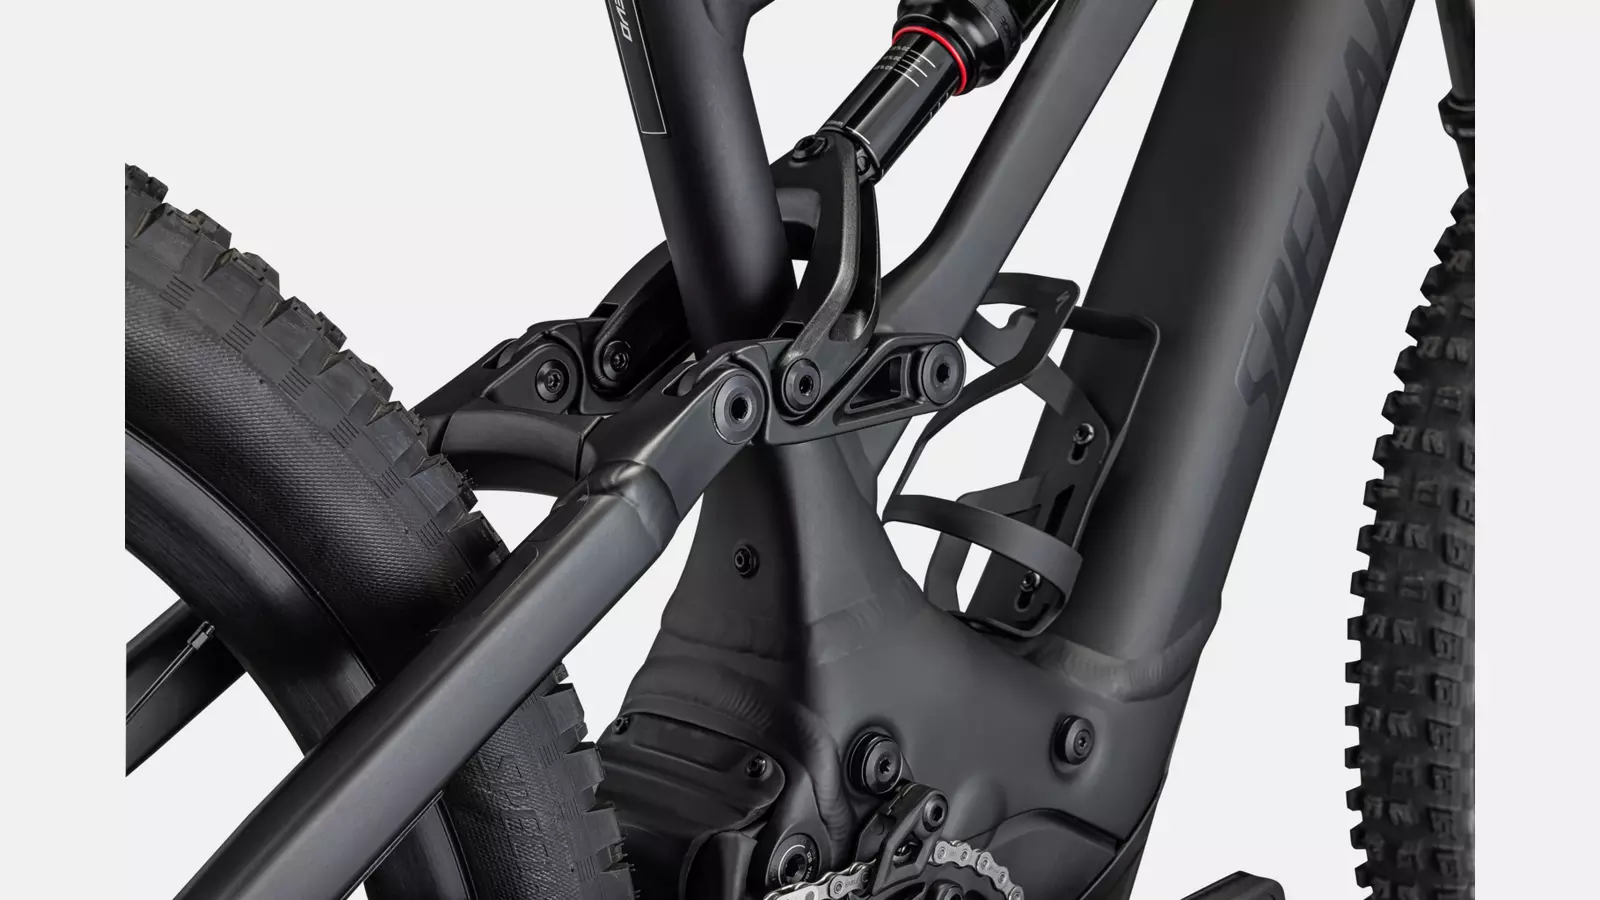 Simon Stewart reviews the Specialized Turbo Levo for Blister